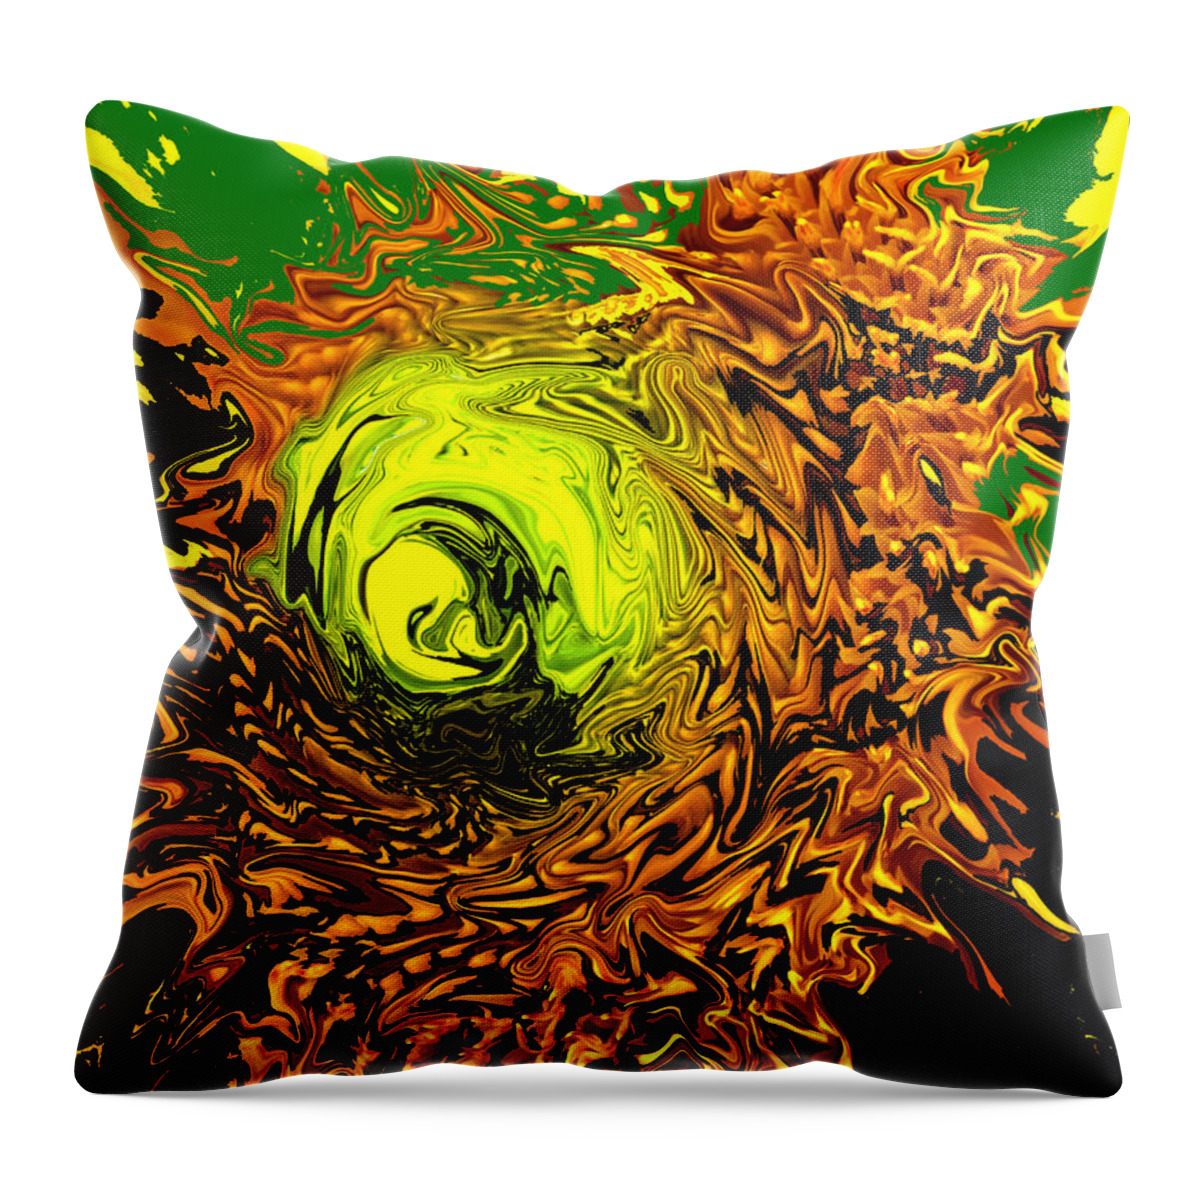 Abstract Throw Pillow featuring the digital art Special by Ian MacDonald